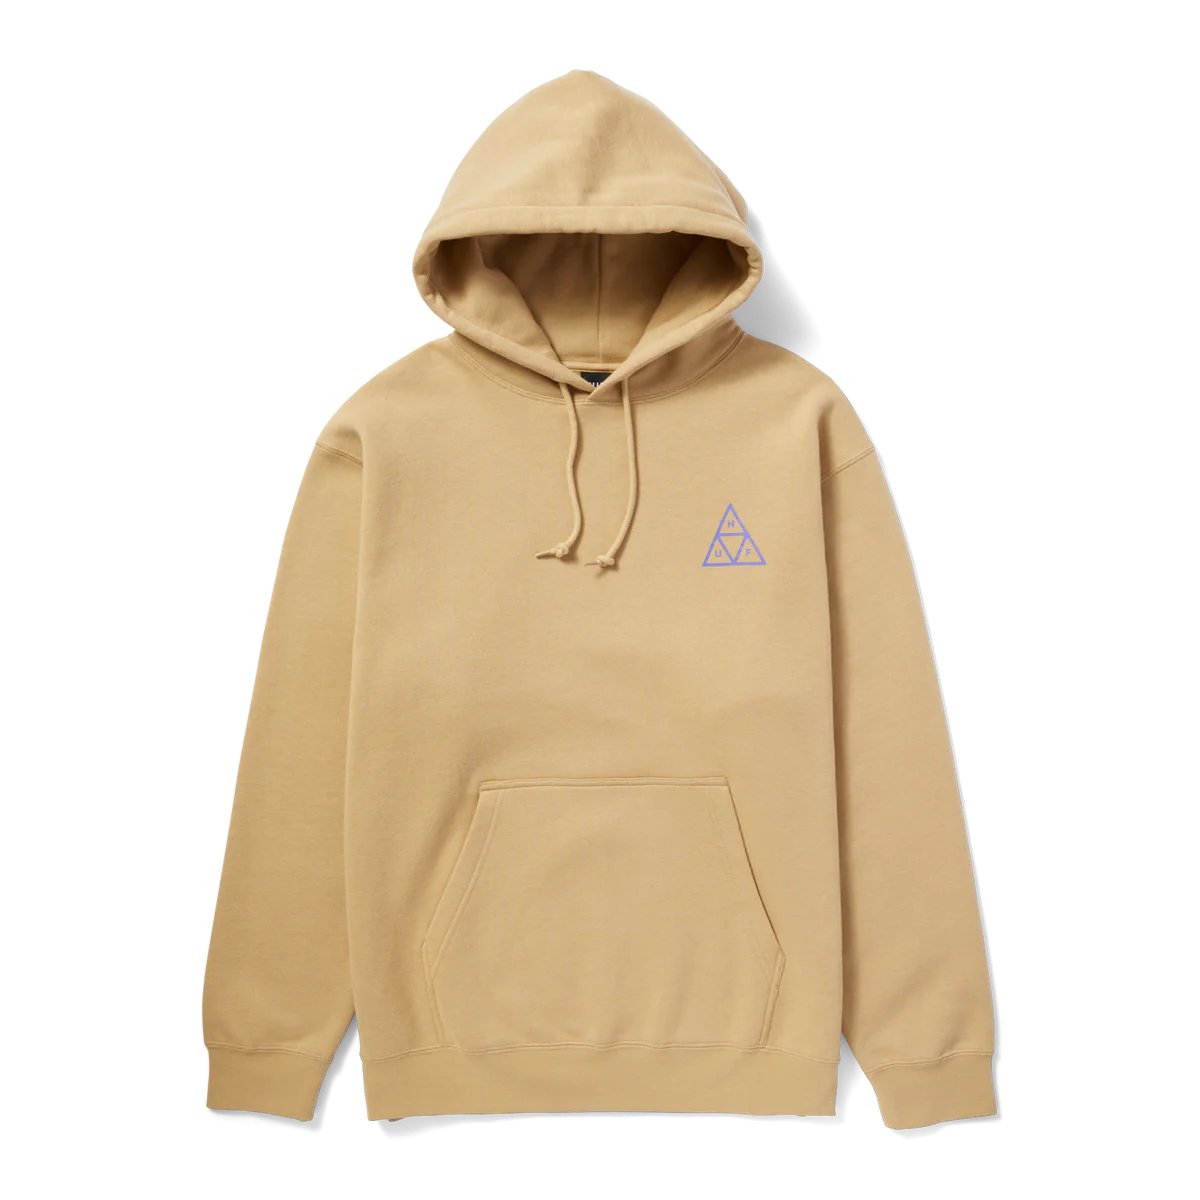 HUF Set Triple Triangle Pullover Hoodie Oatmeal Men's Pullover Hoodies huf 